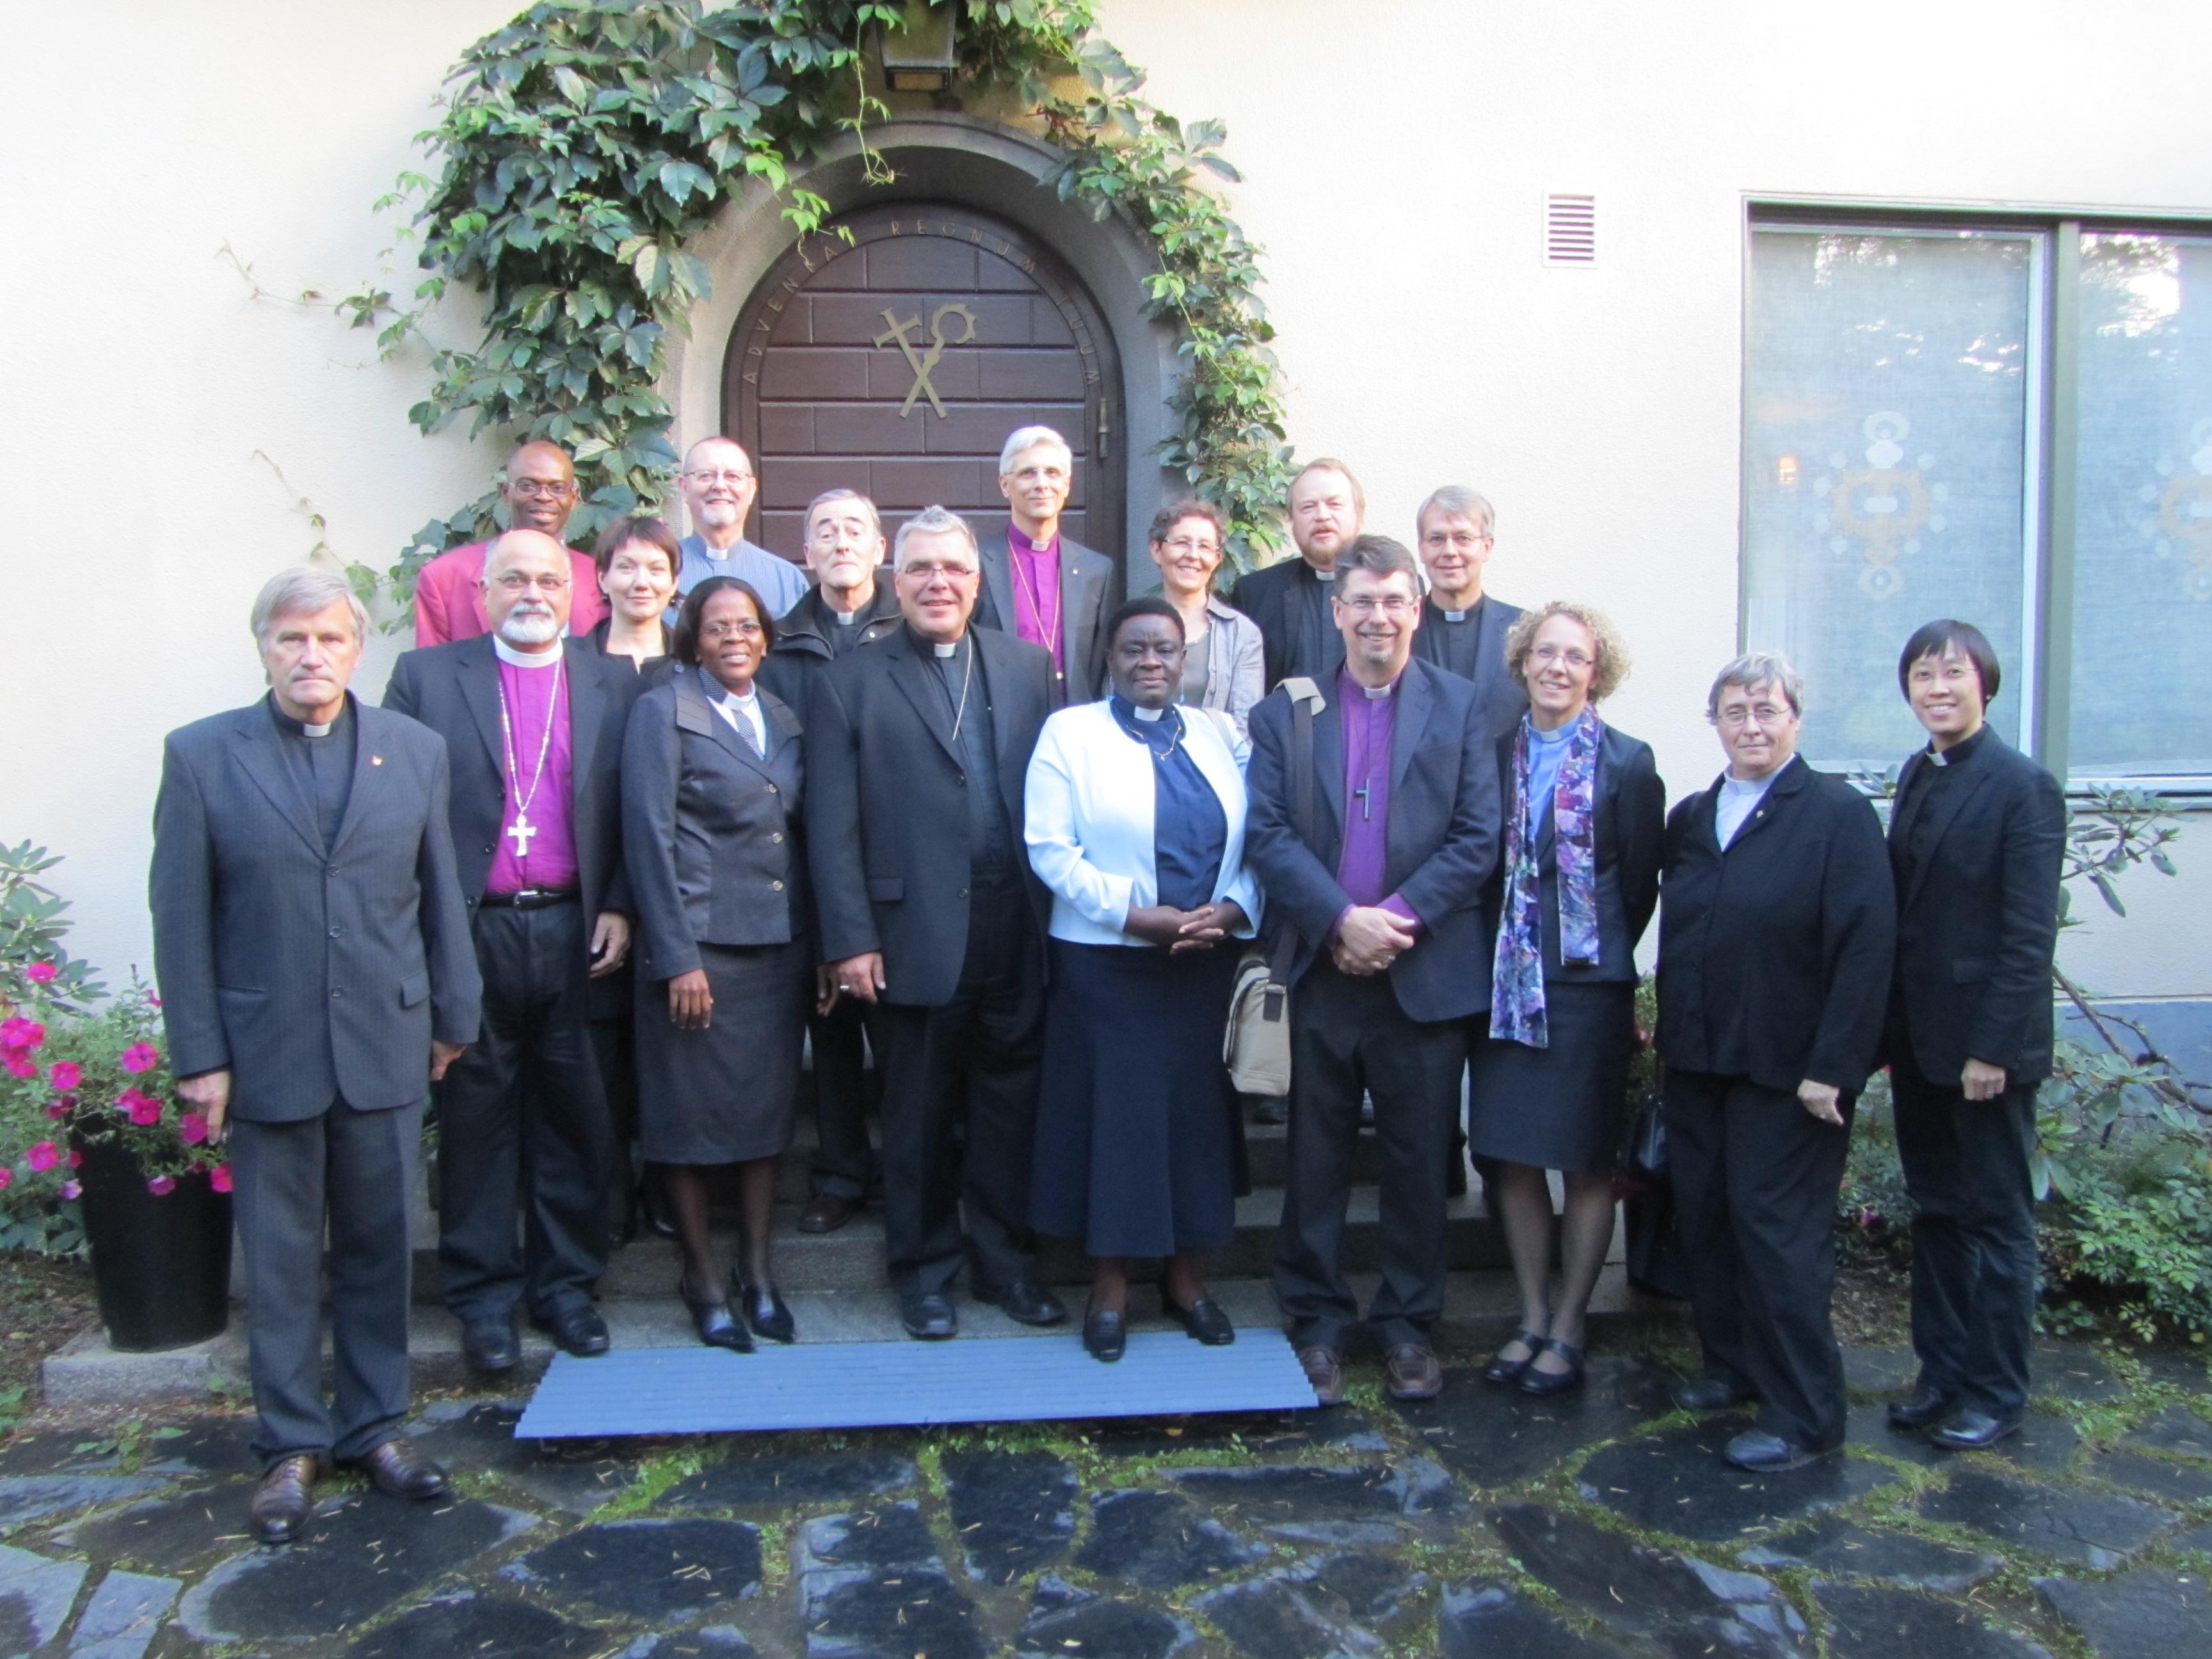 ALICC members in front of the Bishopâs house in Tampere, Finland. Photo: ELCF